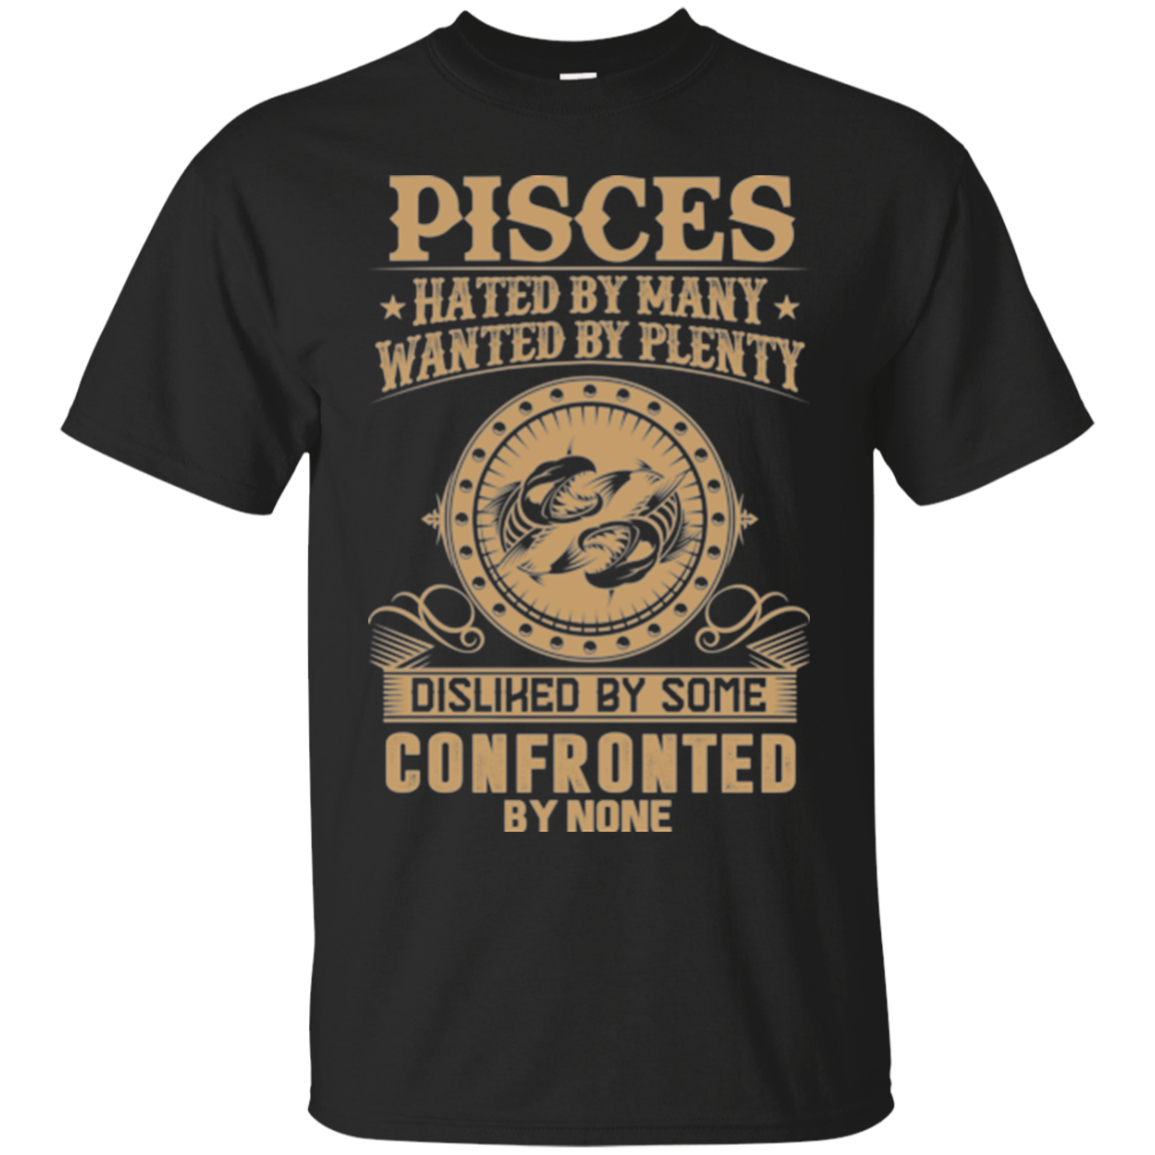 Pisces Shirts Hated By Many Wanted By Plenty - Teesmiley